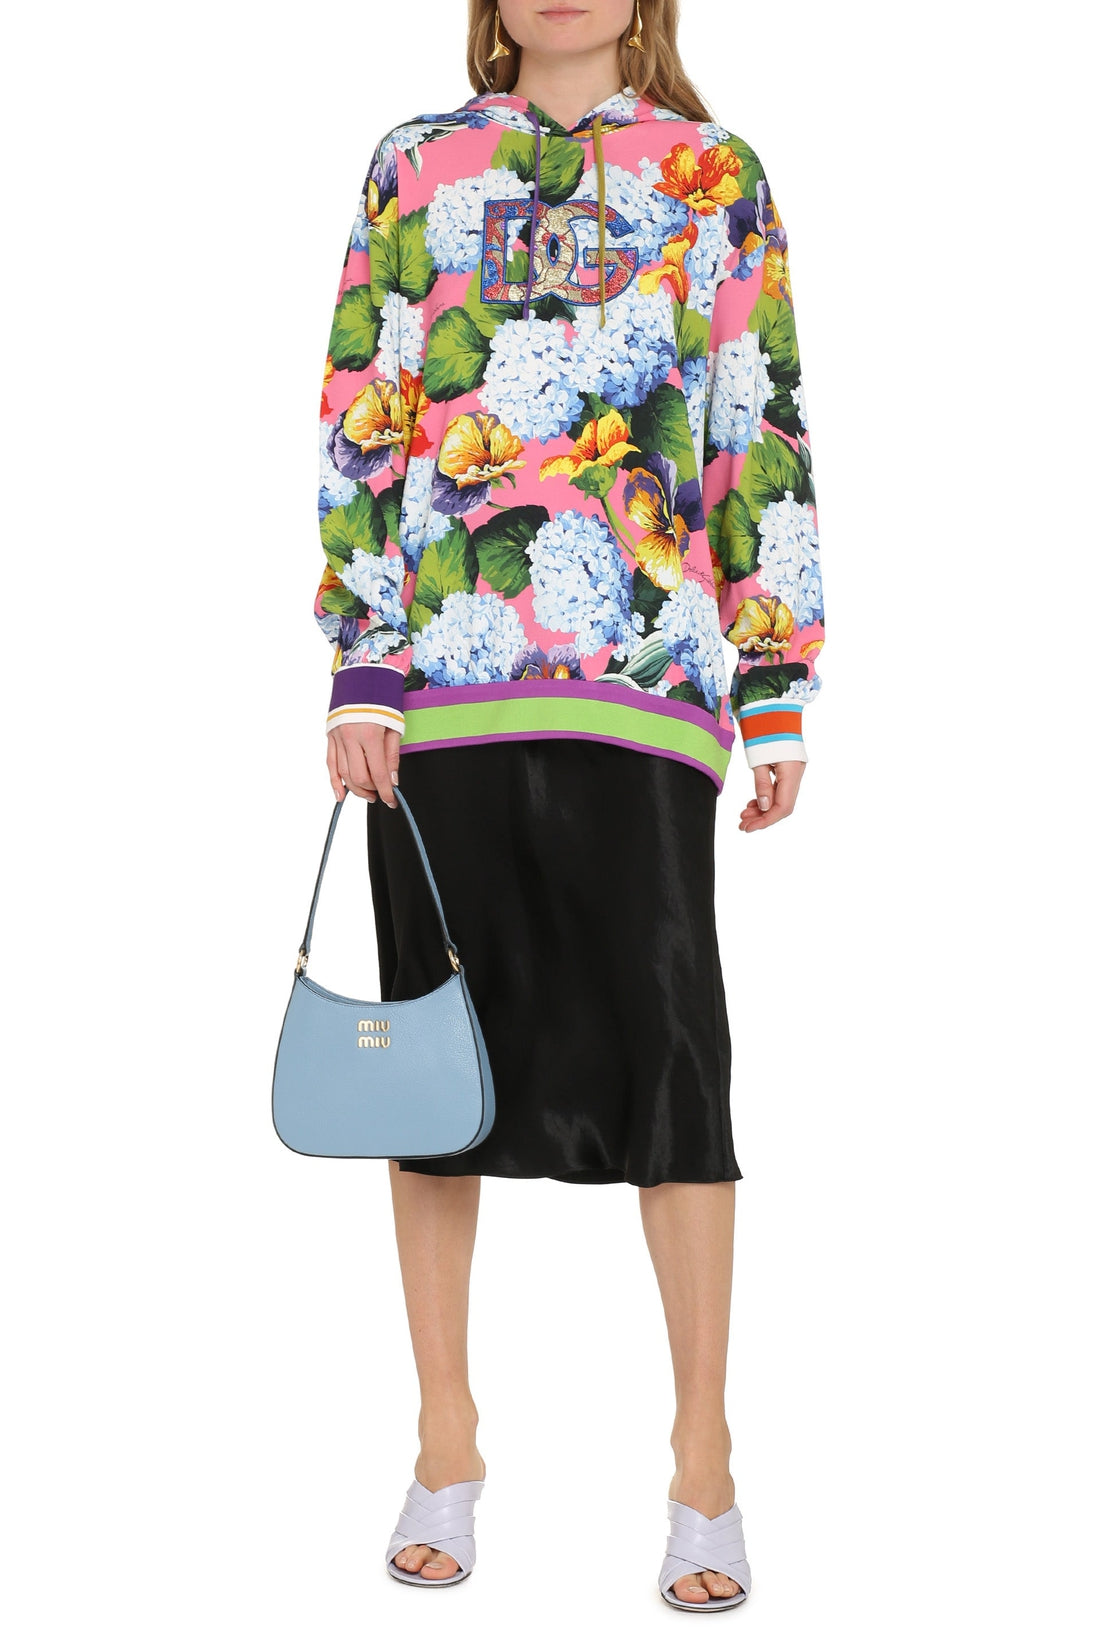 Dolce & Gabbana-OUTLET-SALE-Printed hoodie-ARCHIVIST